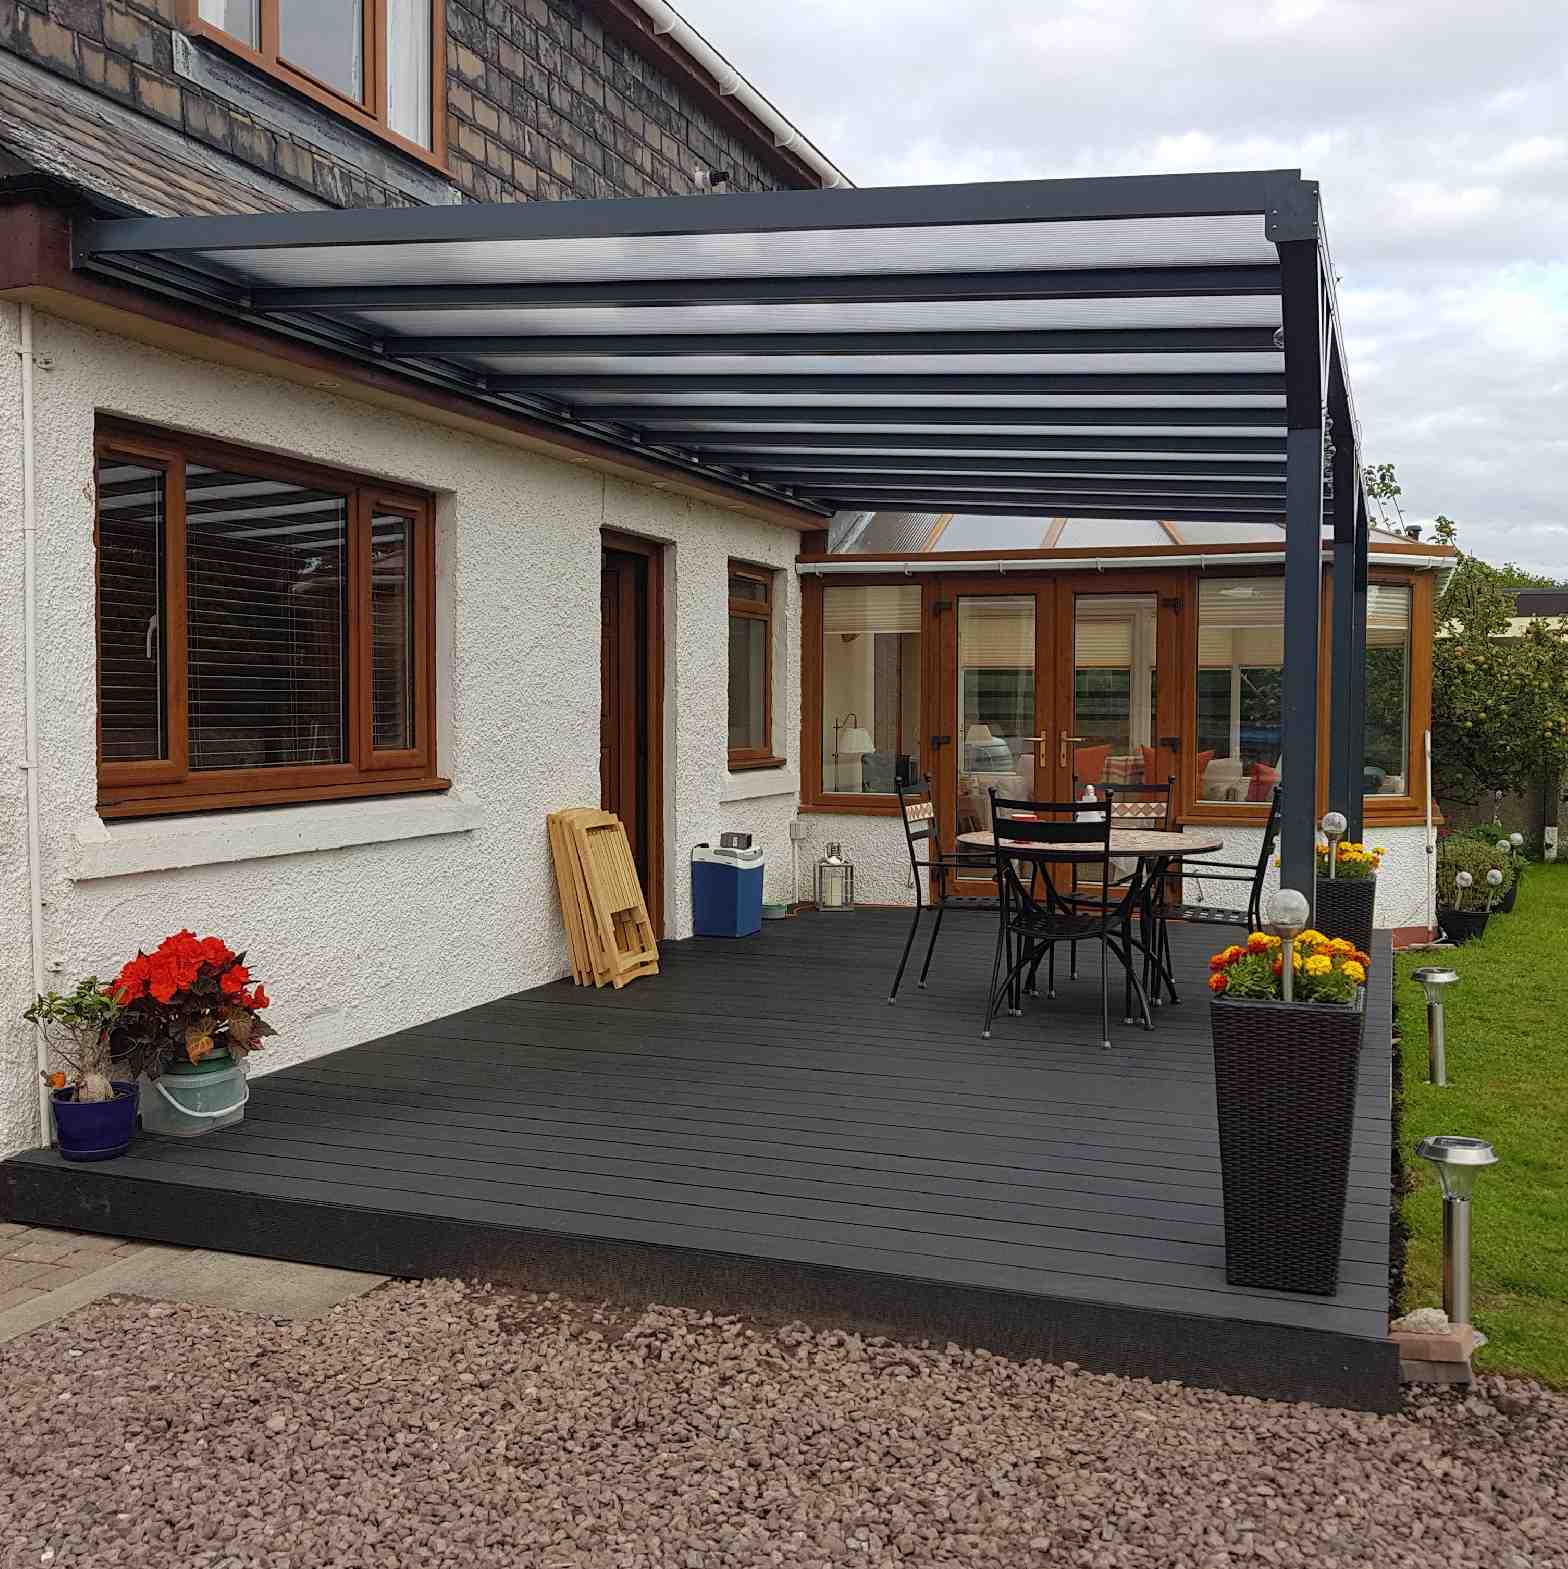 Buy Omega Verandah, Anthracite Grey, 16mm Polycarbonate Glazing - 5.2m (W) x 4.5m (P), (3) Supporting Posts online today